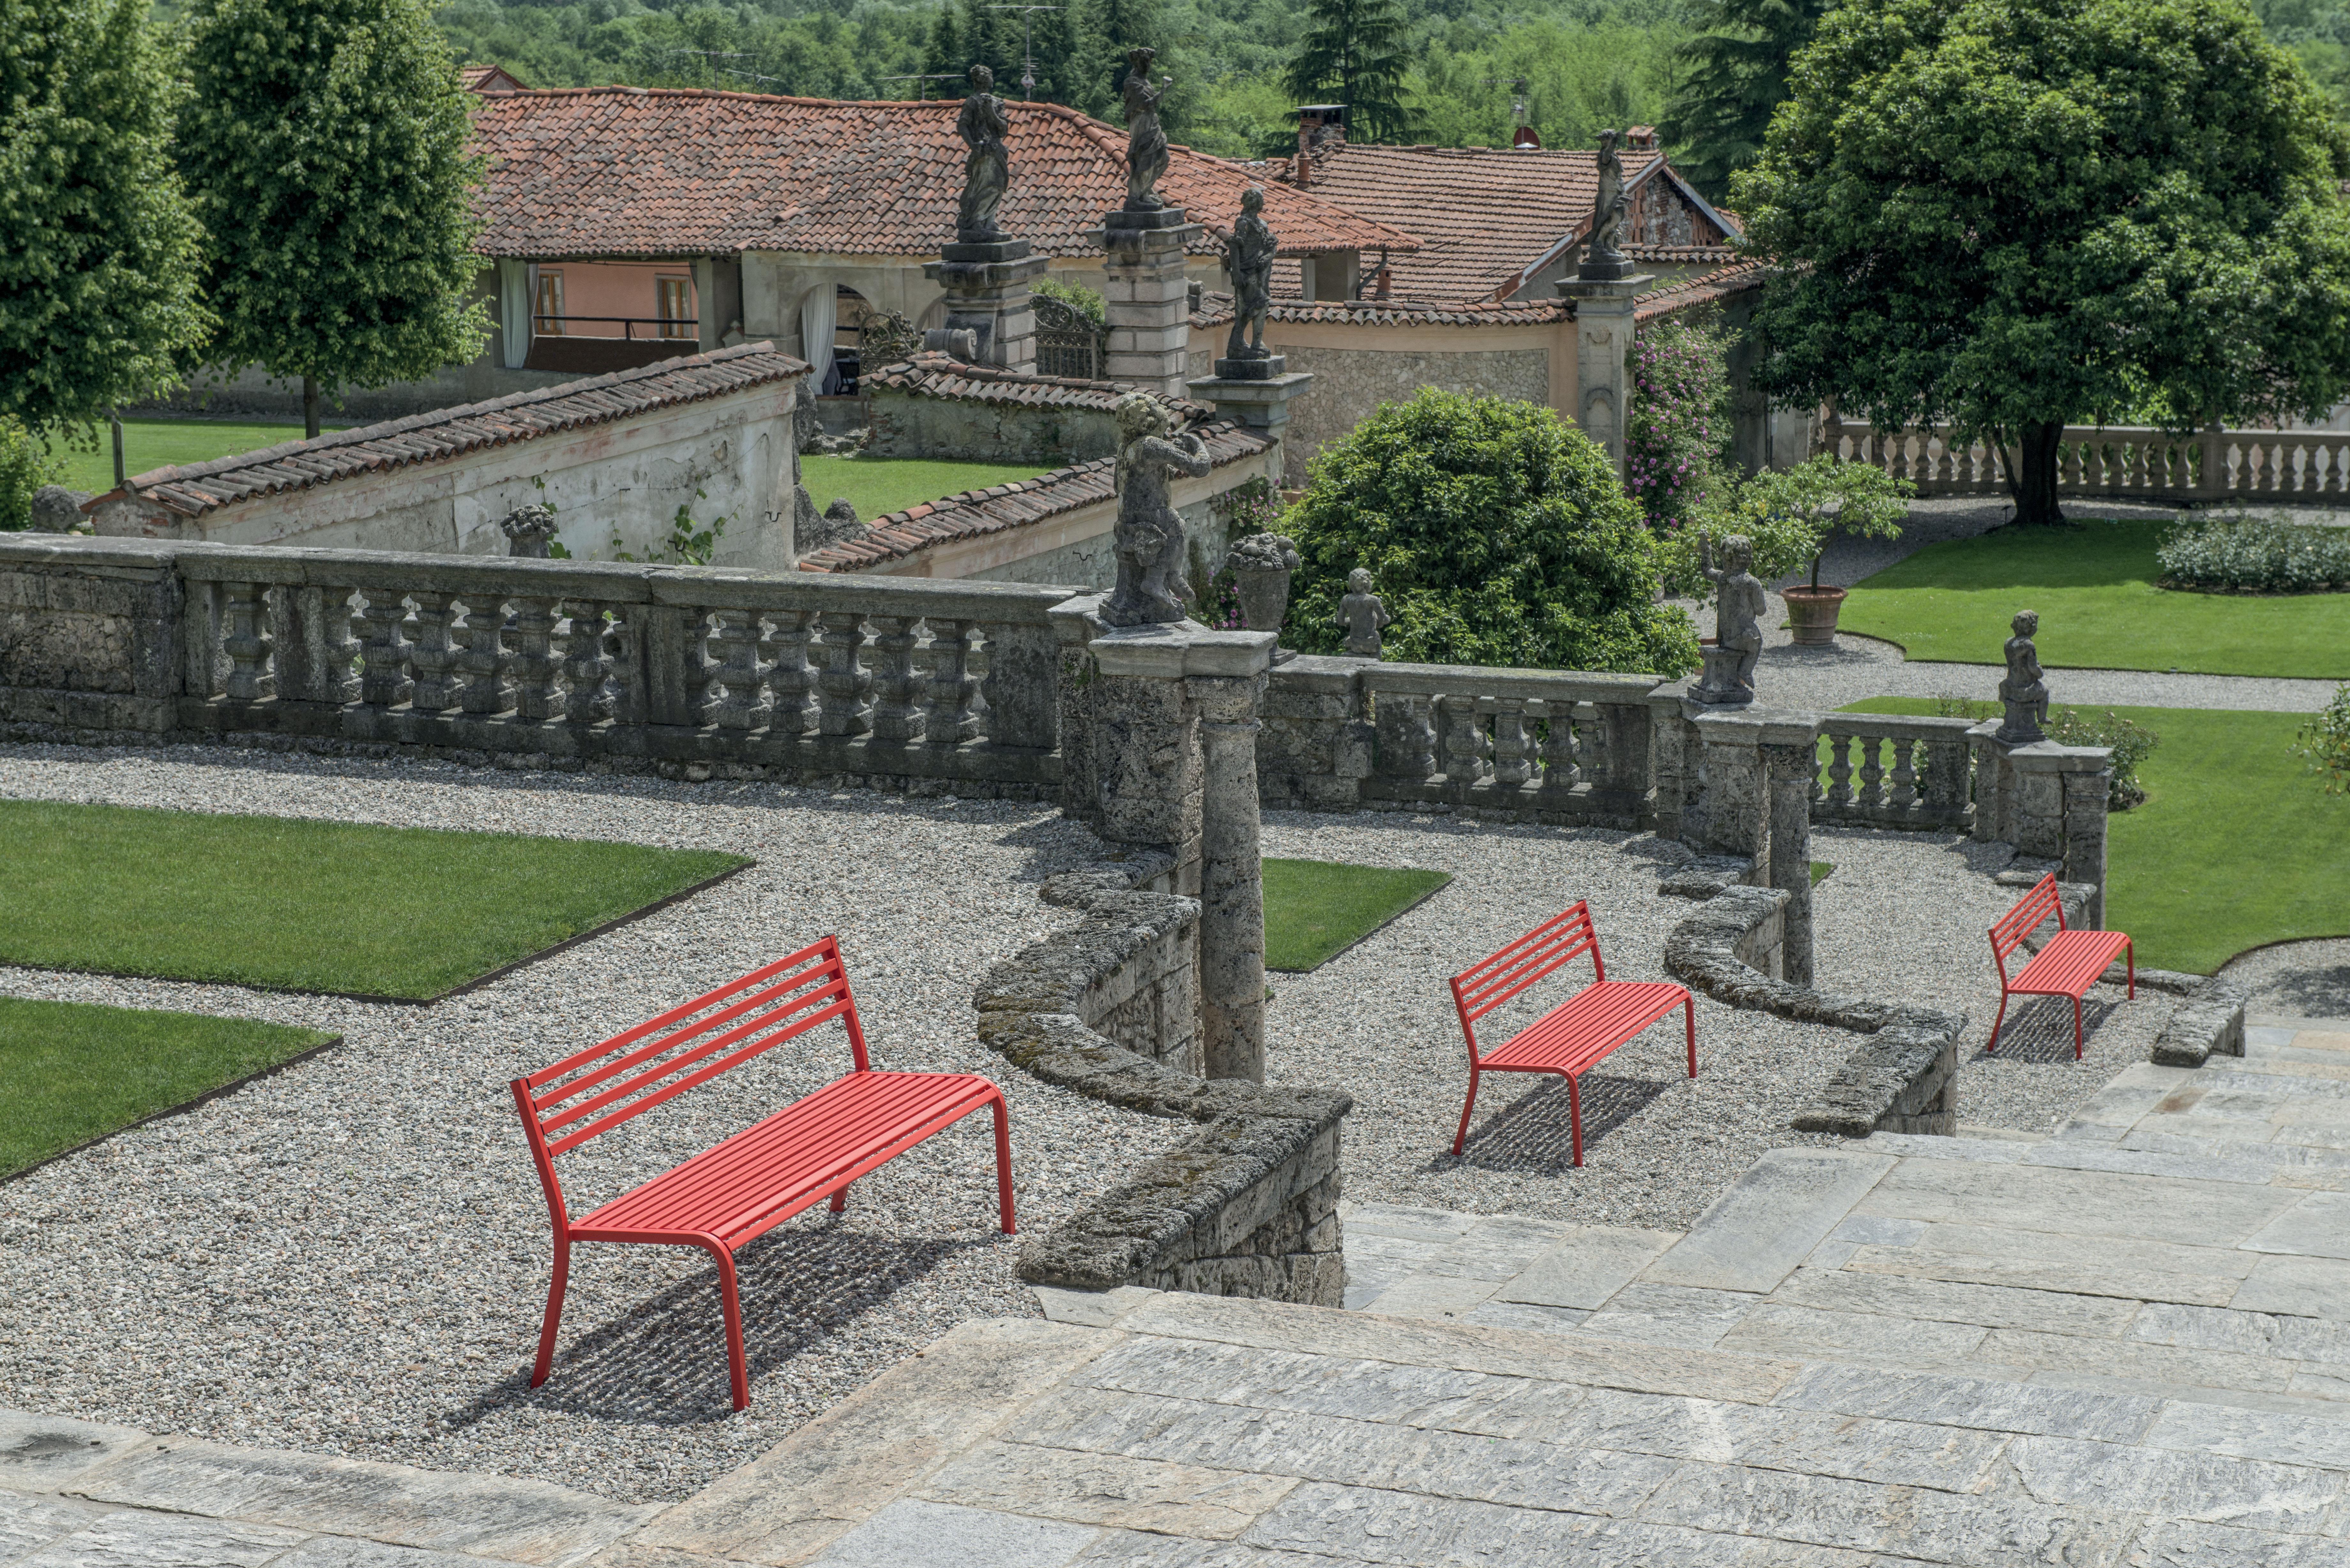 Segno defining element is simplicity: Segno, a collection which relies on horizontal lines as its identifying feature. Available in two different sizes, the versatile Segno bench, with its distinctive line motif, is the perfect seating element for